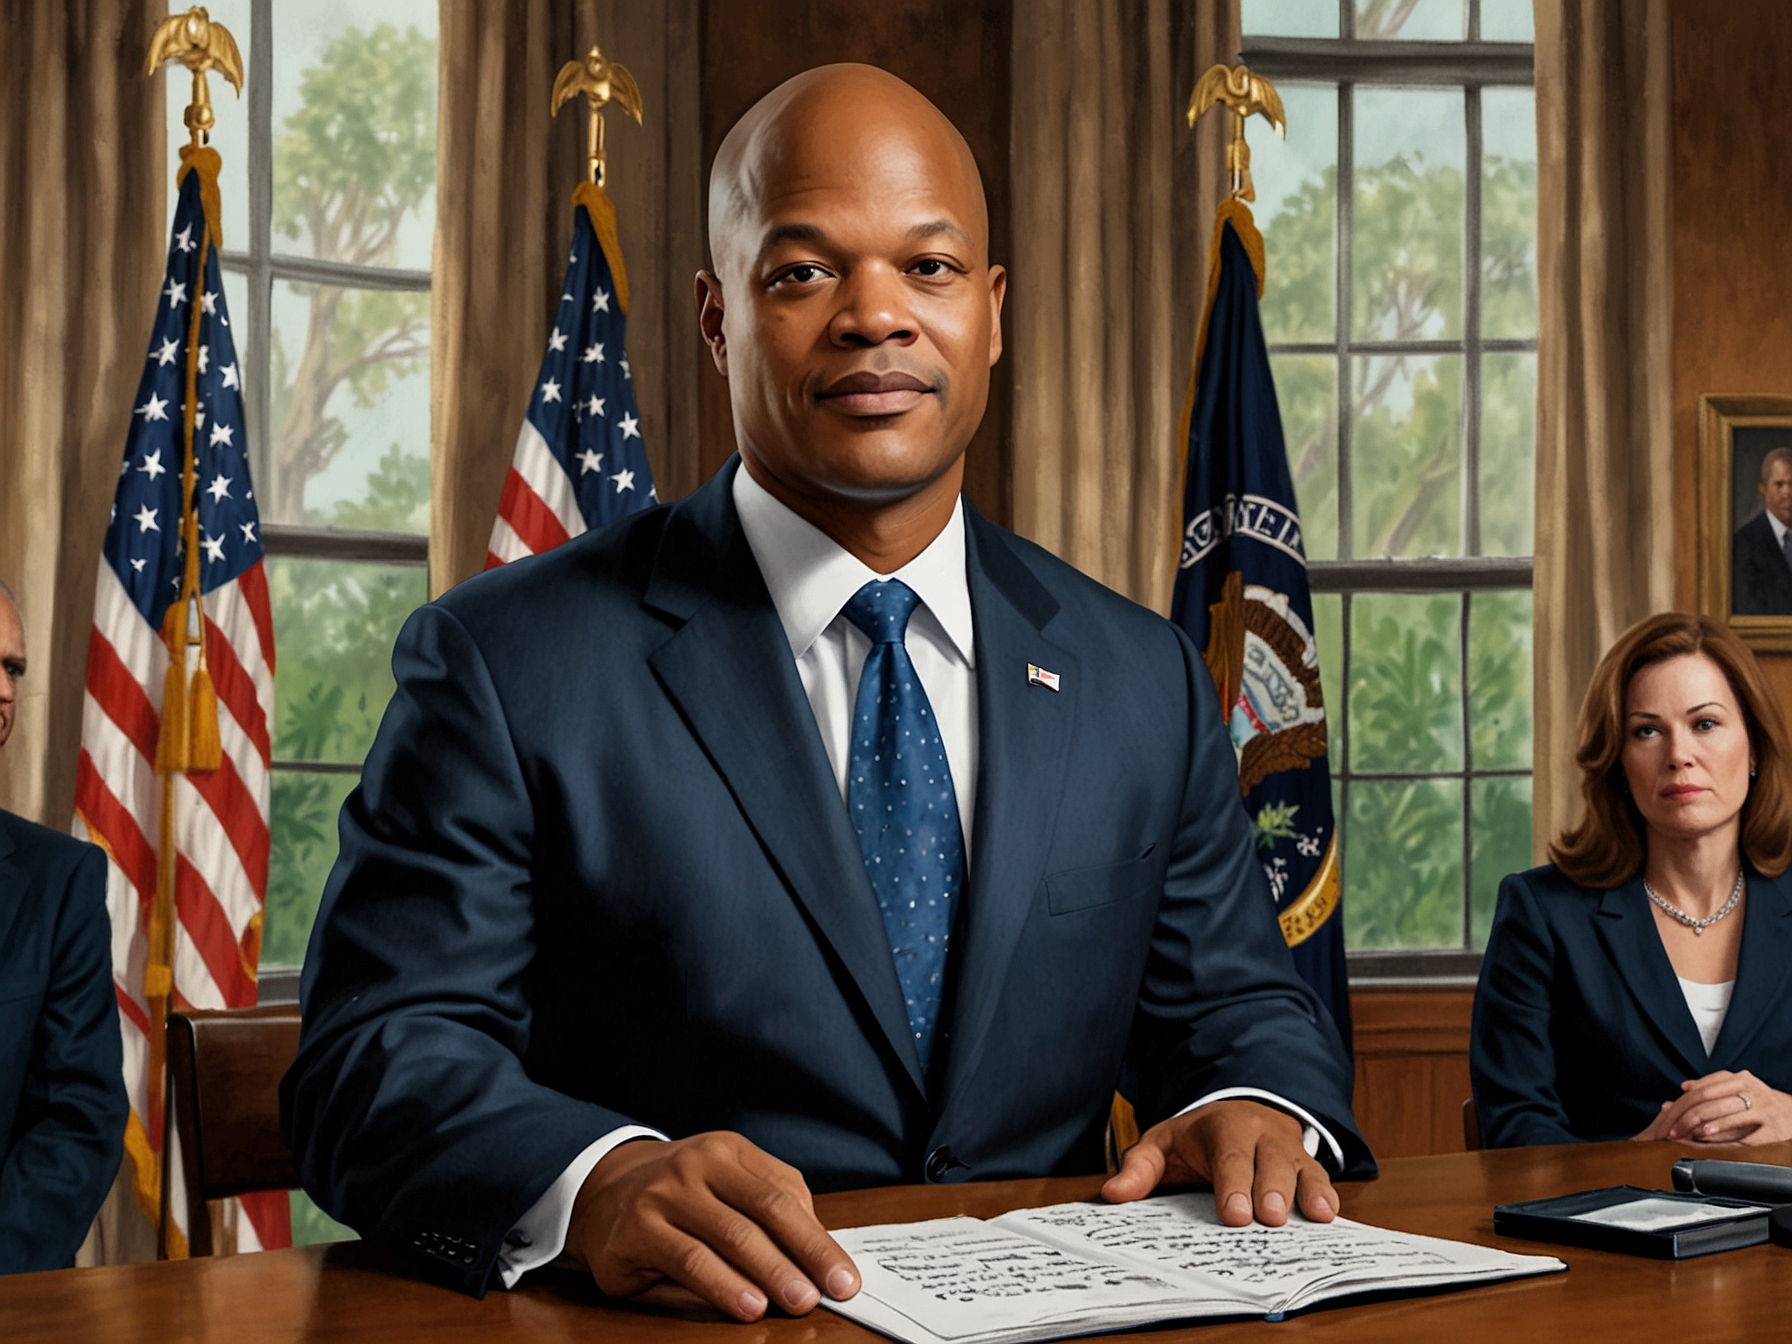 Governor Wes Moore announces the mass pardon of marijuana convictions in a press conference, highlighting the significance of addressing past injustices and promoting social equity.